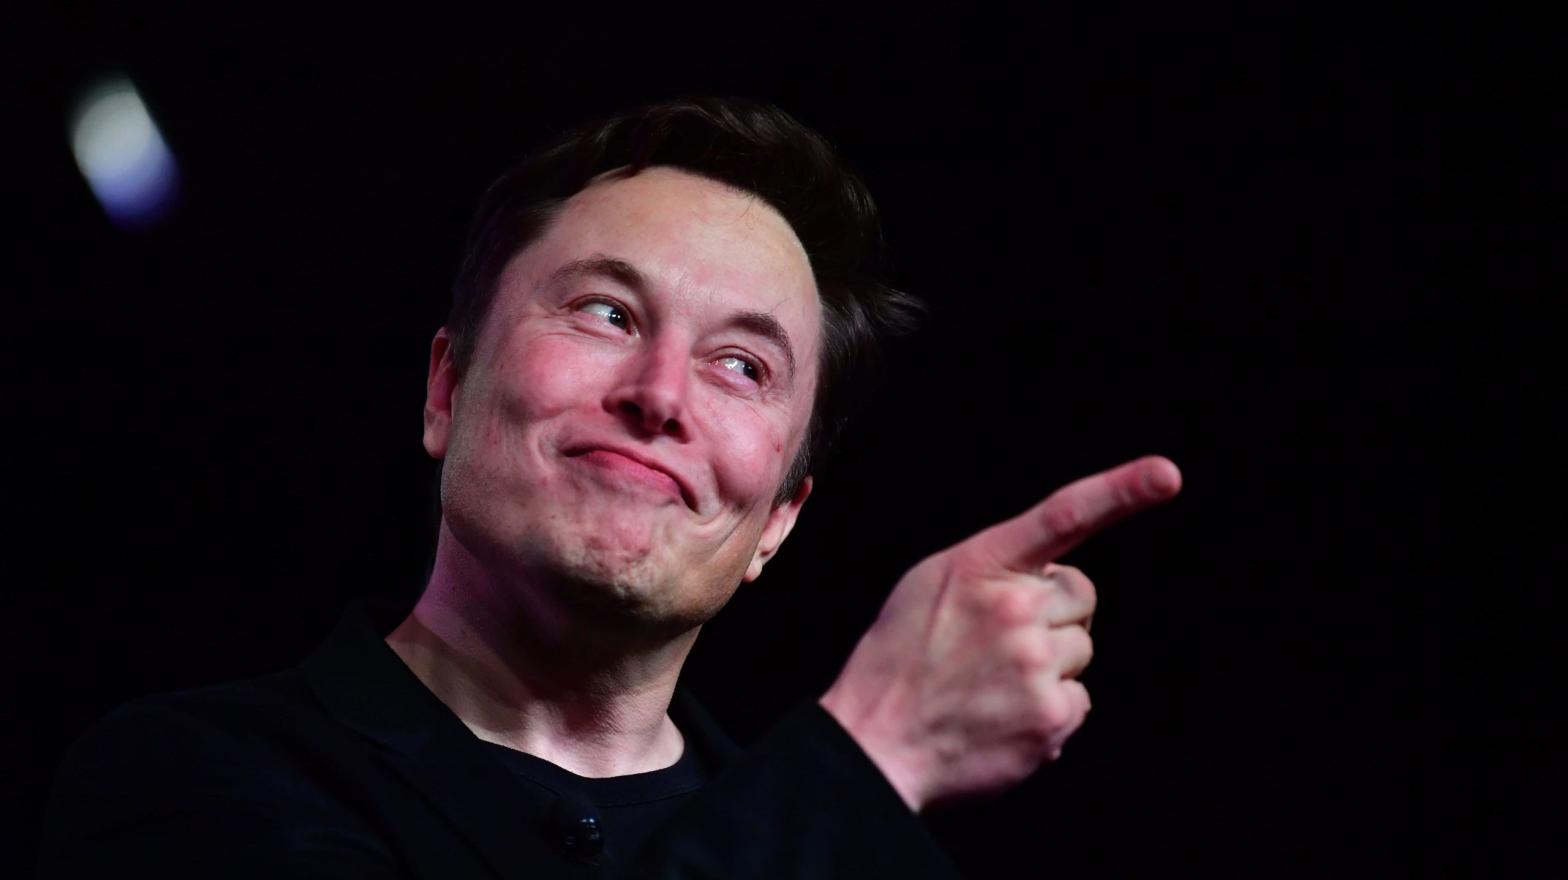 Tesla CEO Elon Musk speaks during the unveiling of the new Tesla Model Y in Hawthorne, California on March 14, 2019. (Photo: Frederic J. Brown / AFP, Getty Images)